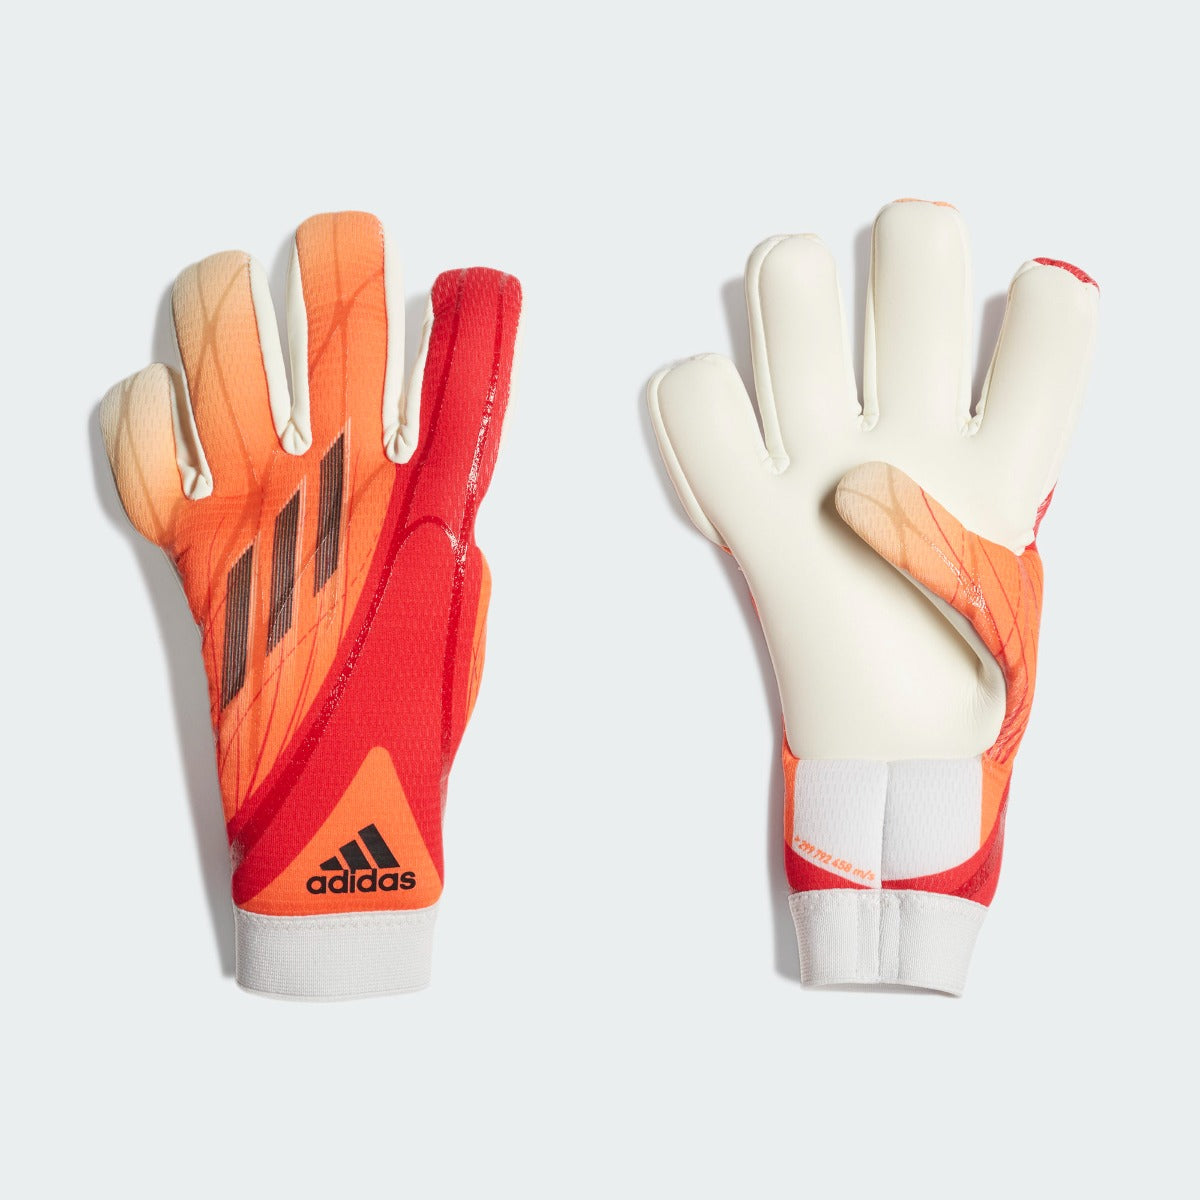 Adidas Youth X League Goalkeeper Gloves - Solar Red (Set)